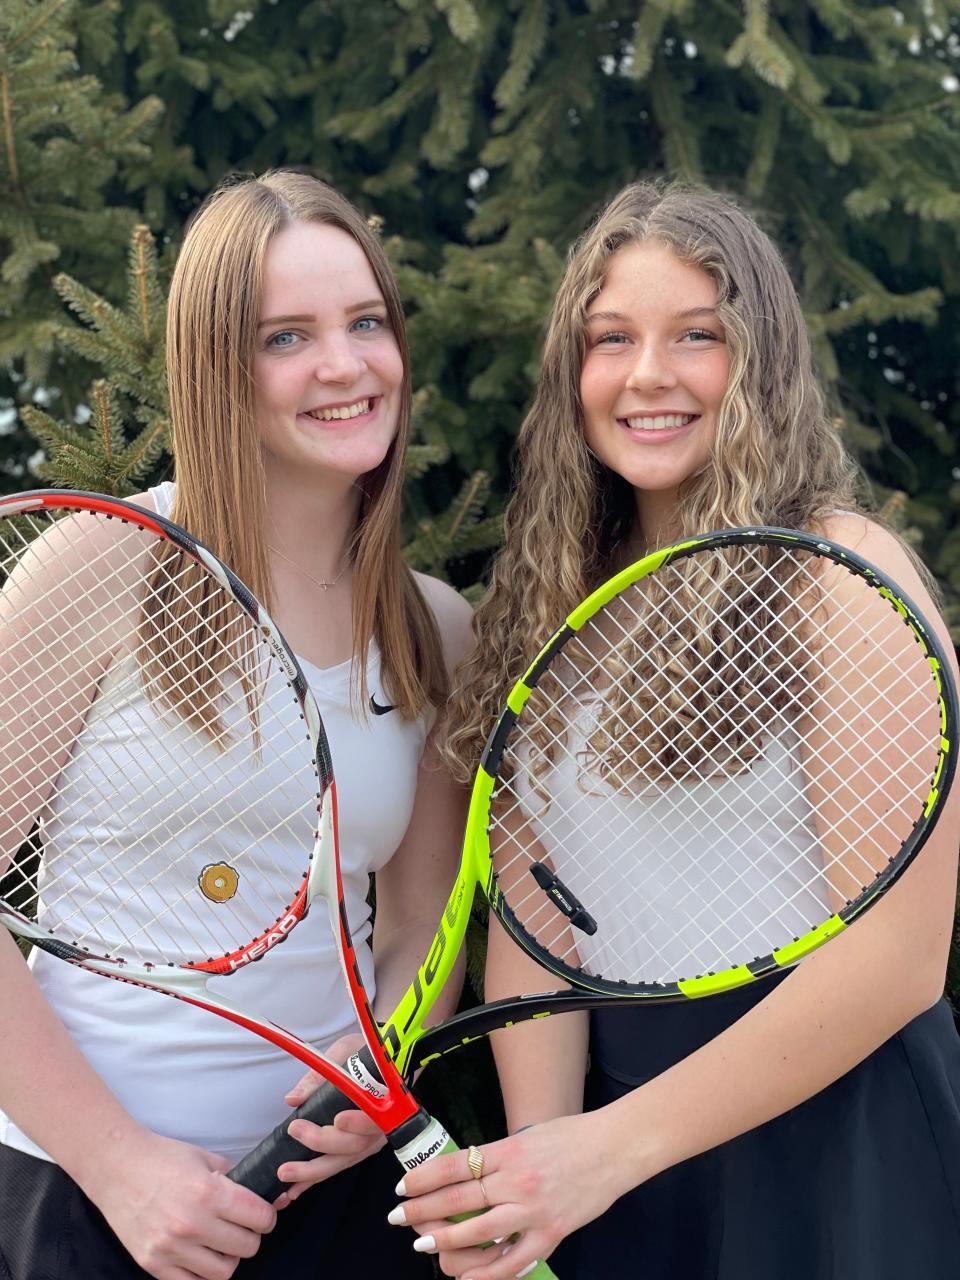 Williamston seniors Kennedy Carson, left, and Lauren Kersten were first team all-state selections in Division 3 by the Michigan High School Tennis Coaches Association.